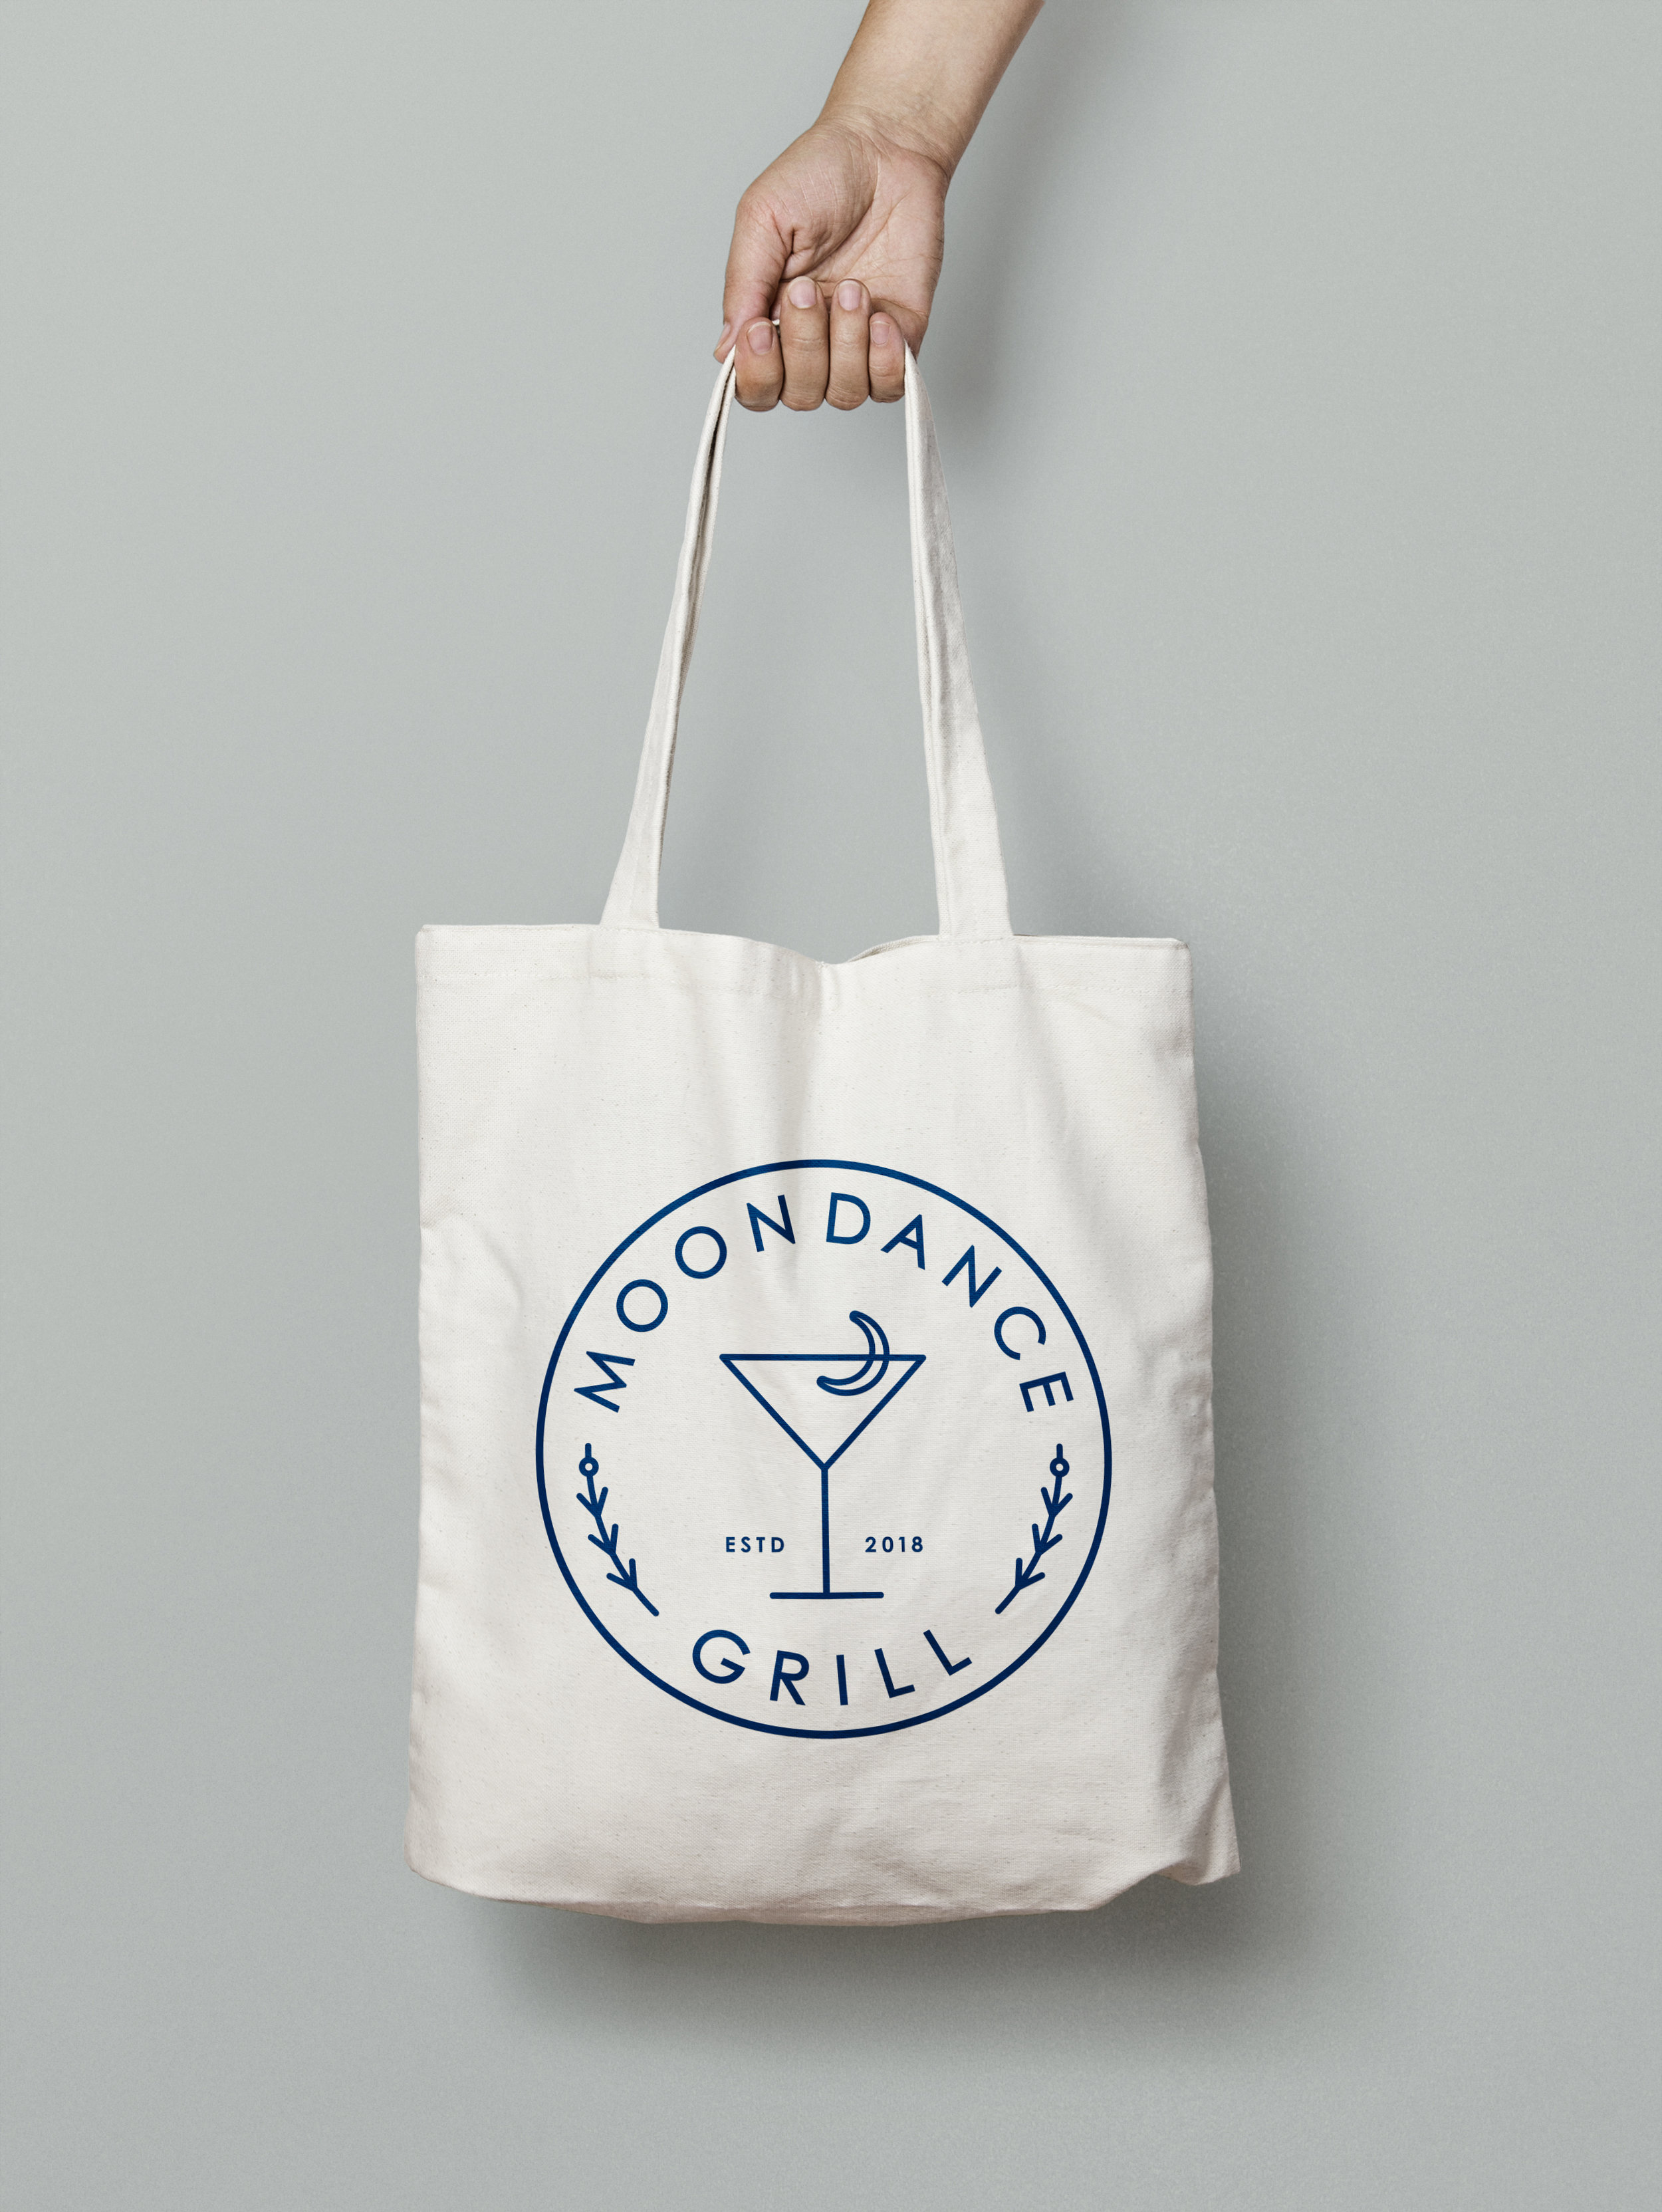  Moondance Grill Germantown Thornwood Prototype Logo Tote  for Tommy Peters, Beale Street Blues Company Memphis  Name development, branding creative and design by Chuck Mitchell 